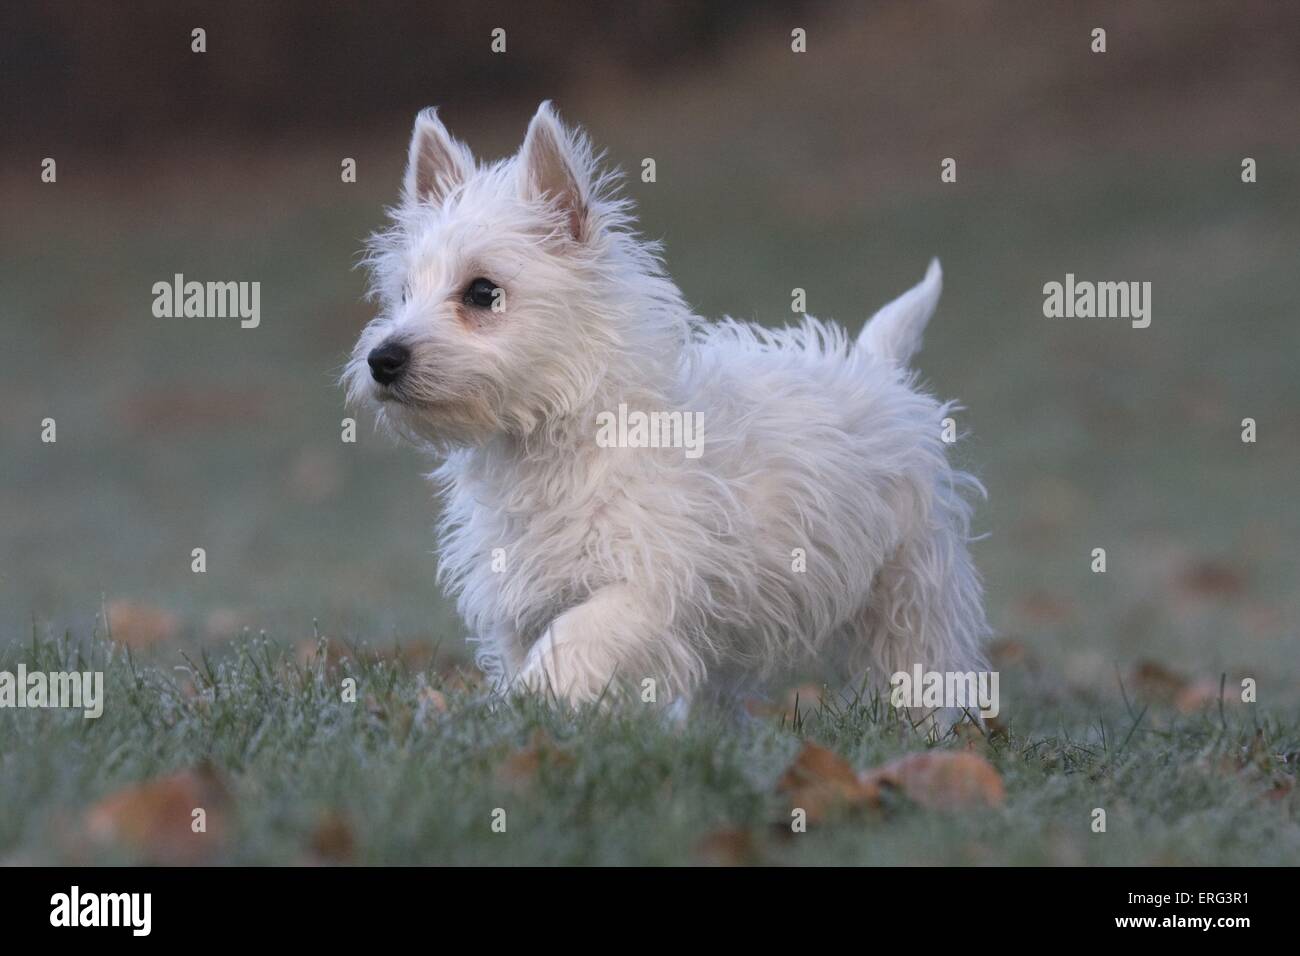 Purebred Westie Puppy High Resolution Stock Photography and Images - Alamy